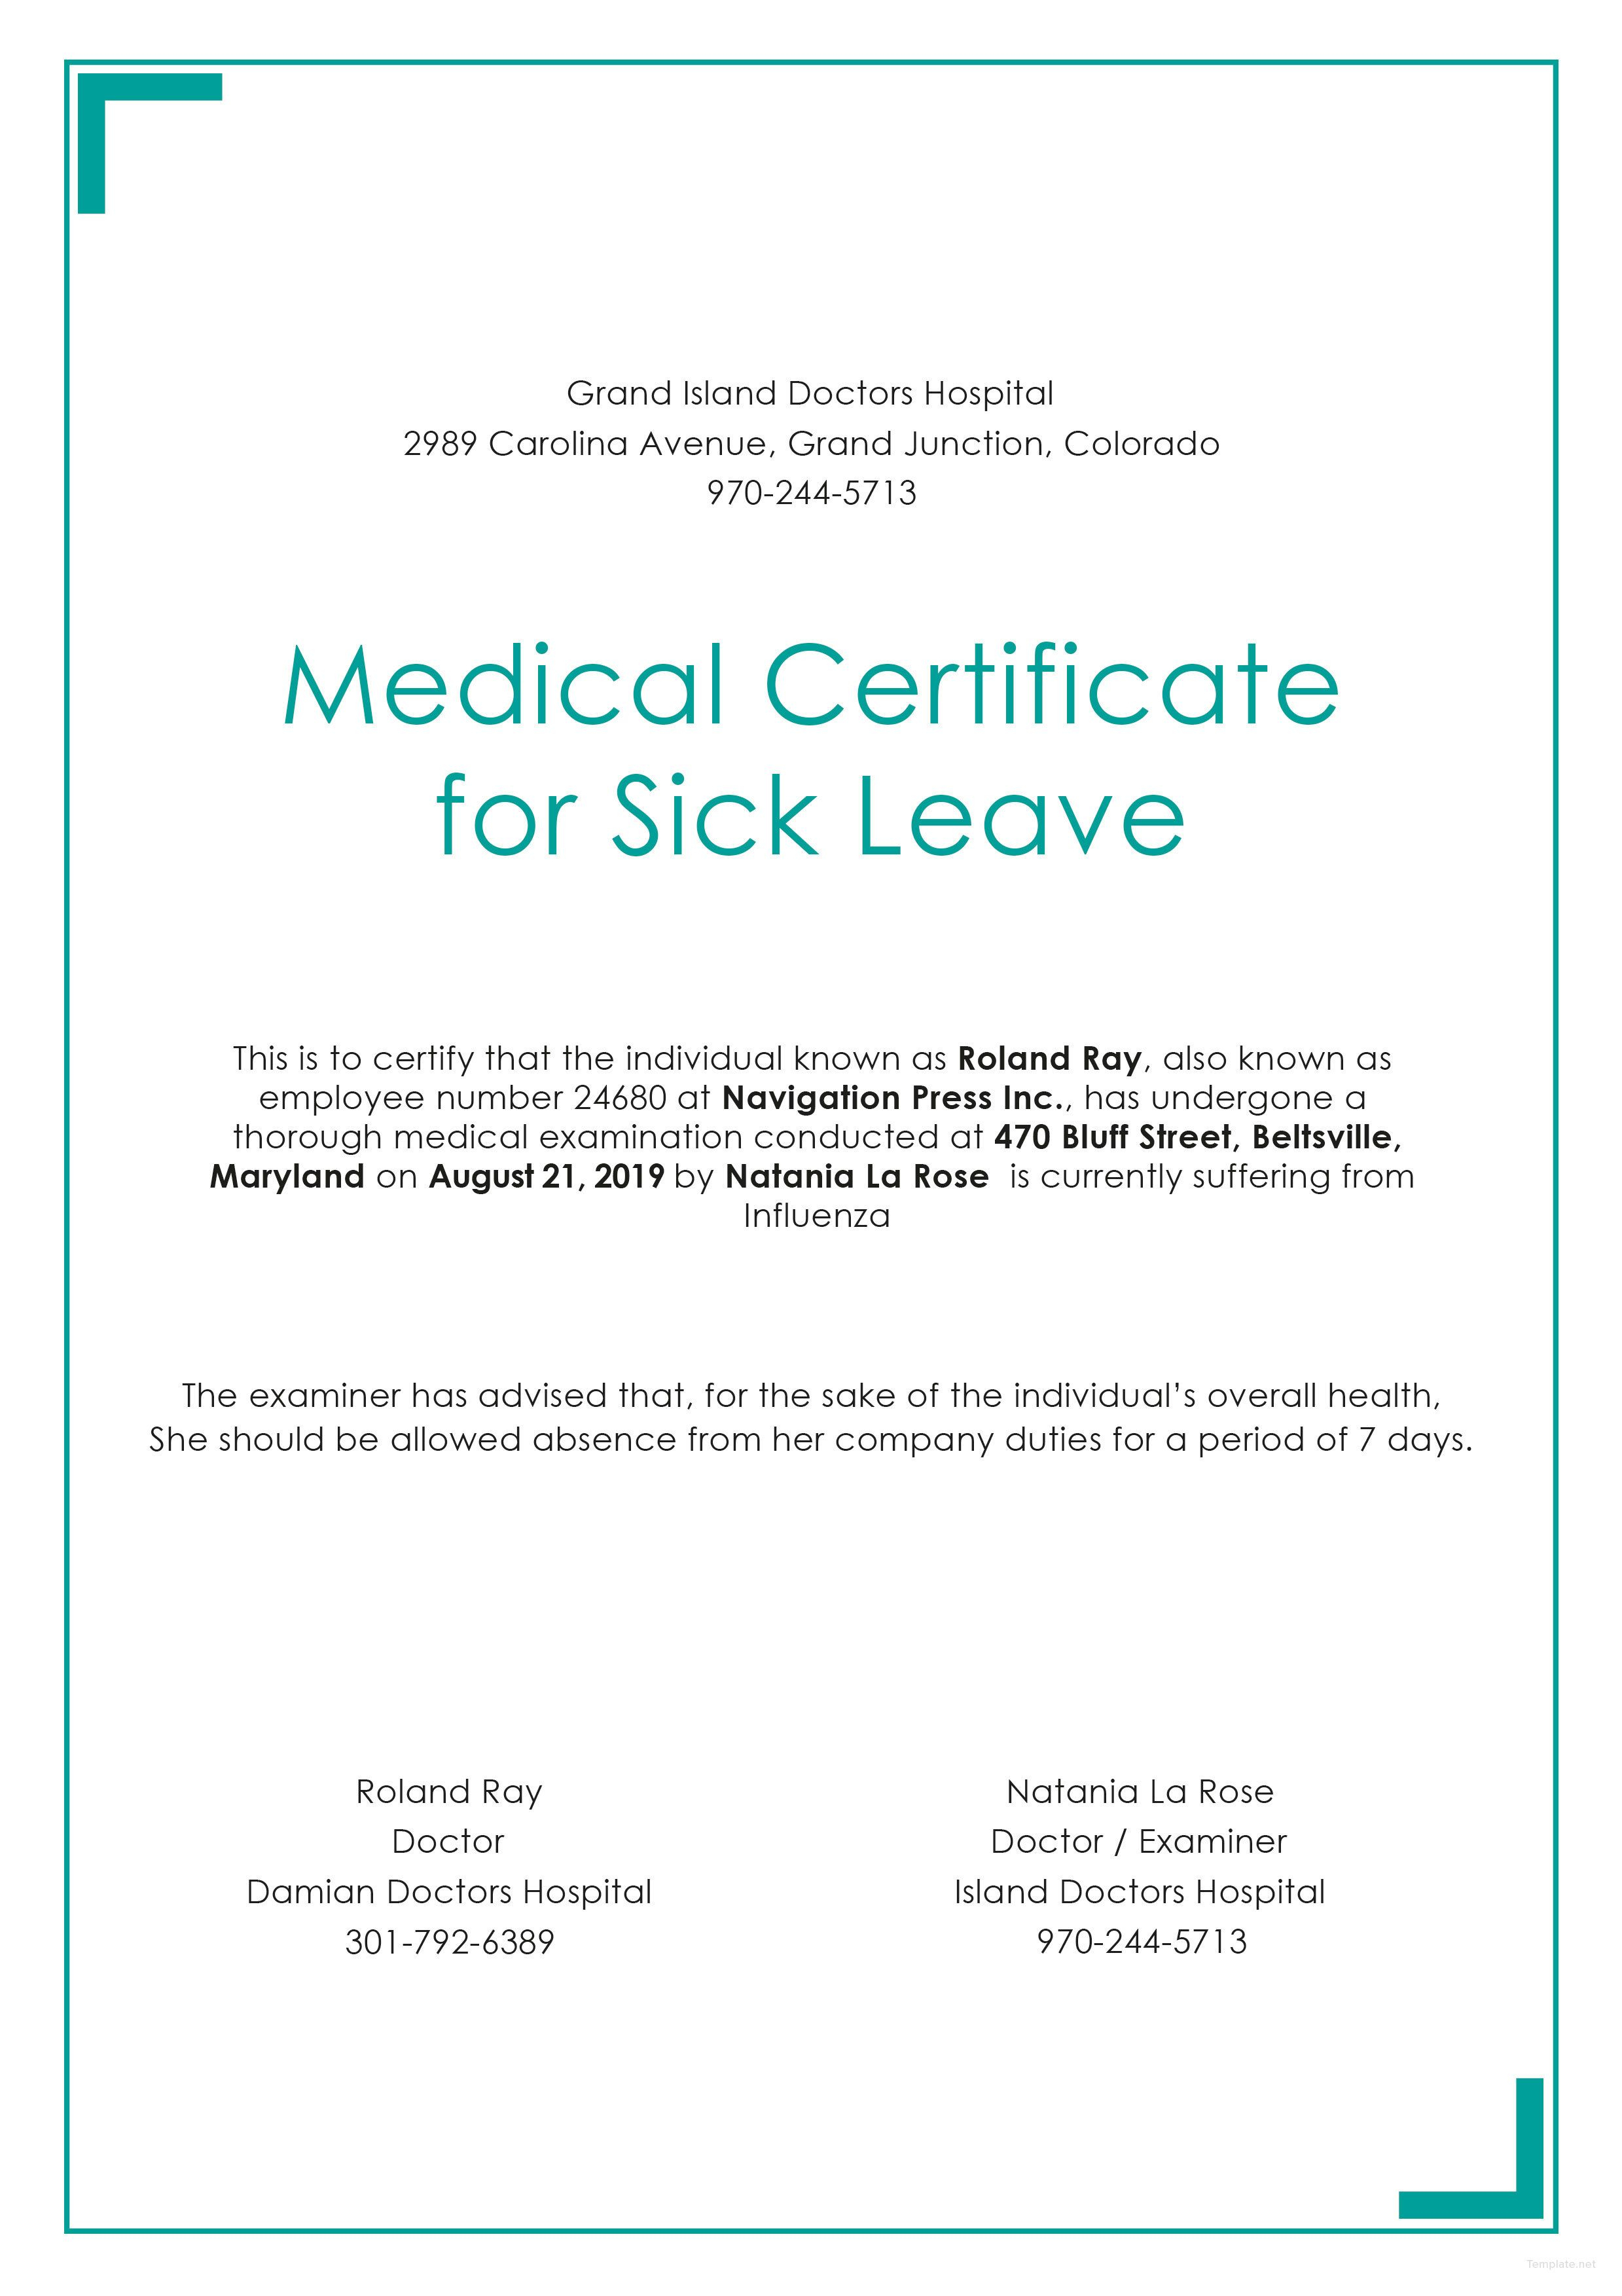 Free Medical Certificate For Sick Leave | Medical, Doctors For Australian Doctors Certificate Template